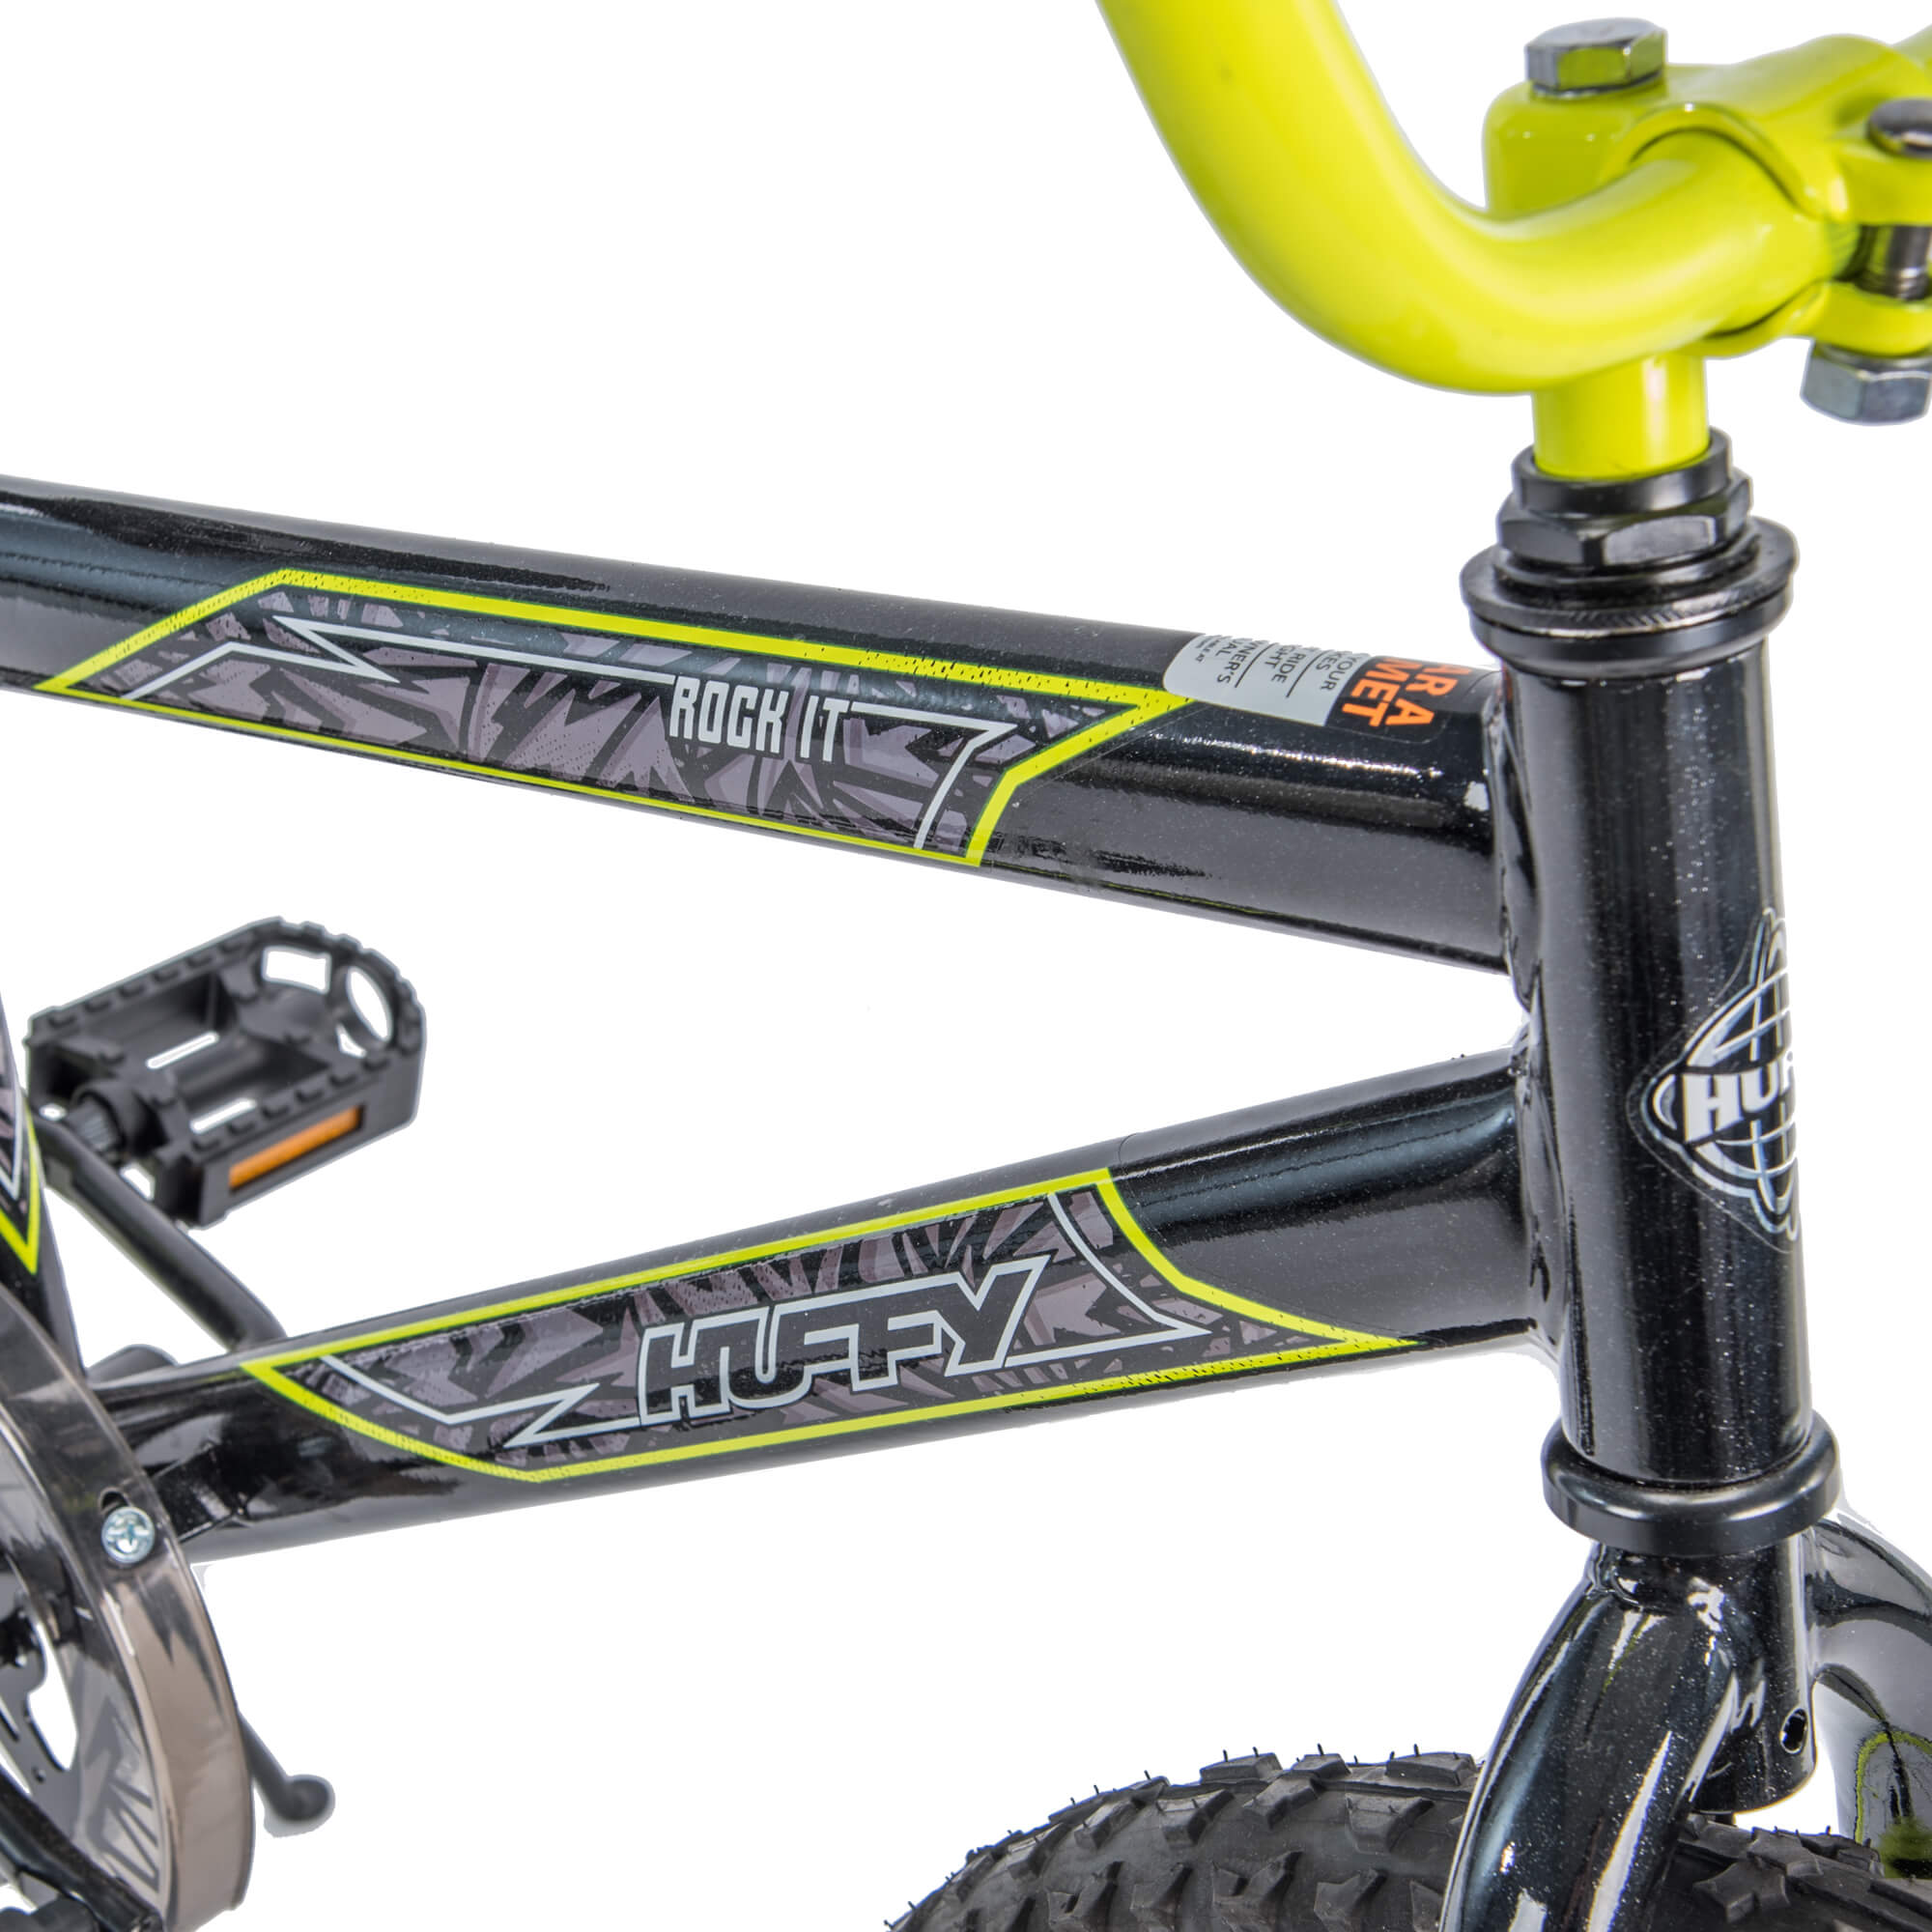 Huffy 20 In. Rock It Boys' Bike, Metallic Black with Neon Yellow Accents - image 4 of 5